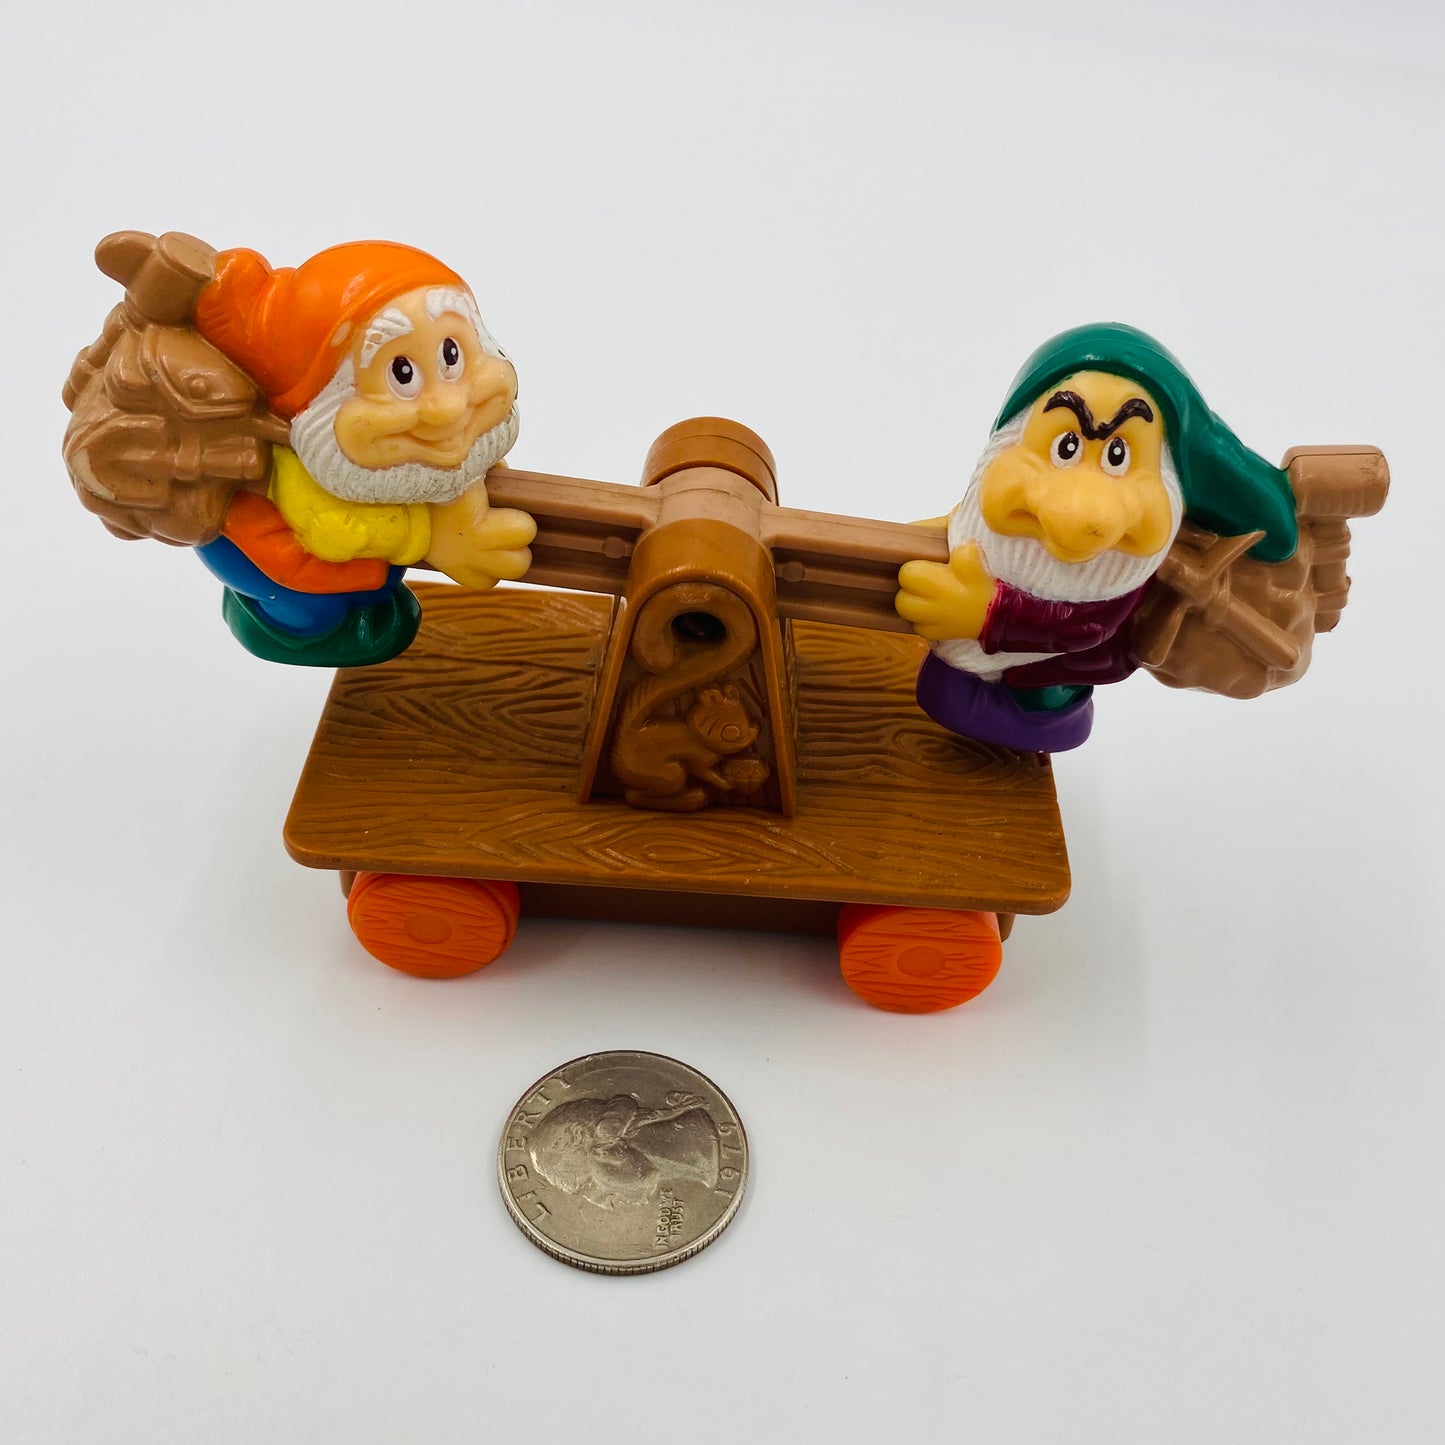 Snow White and the Seven Dwarfs Grumpy & Happy McDonald's Happy Meal toy (1992) loose